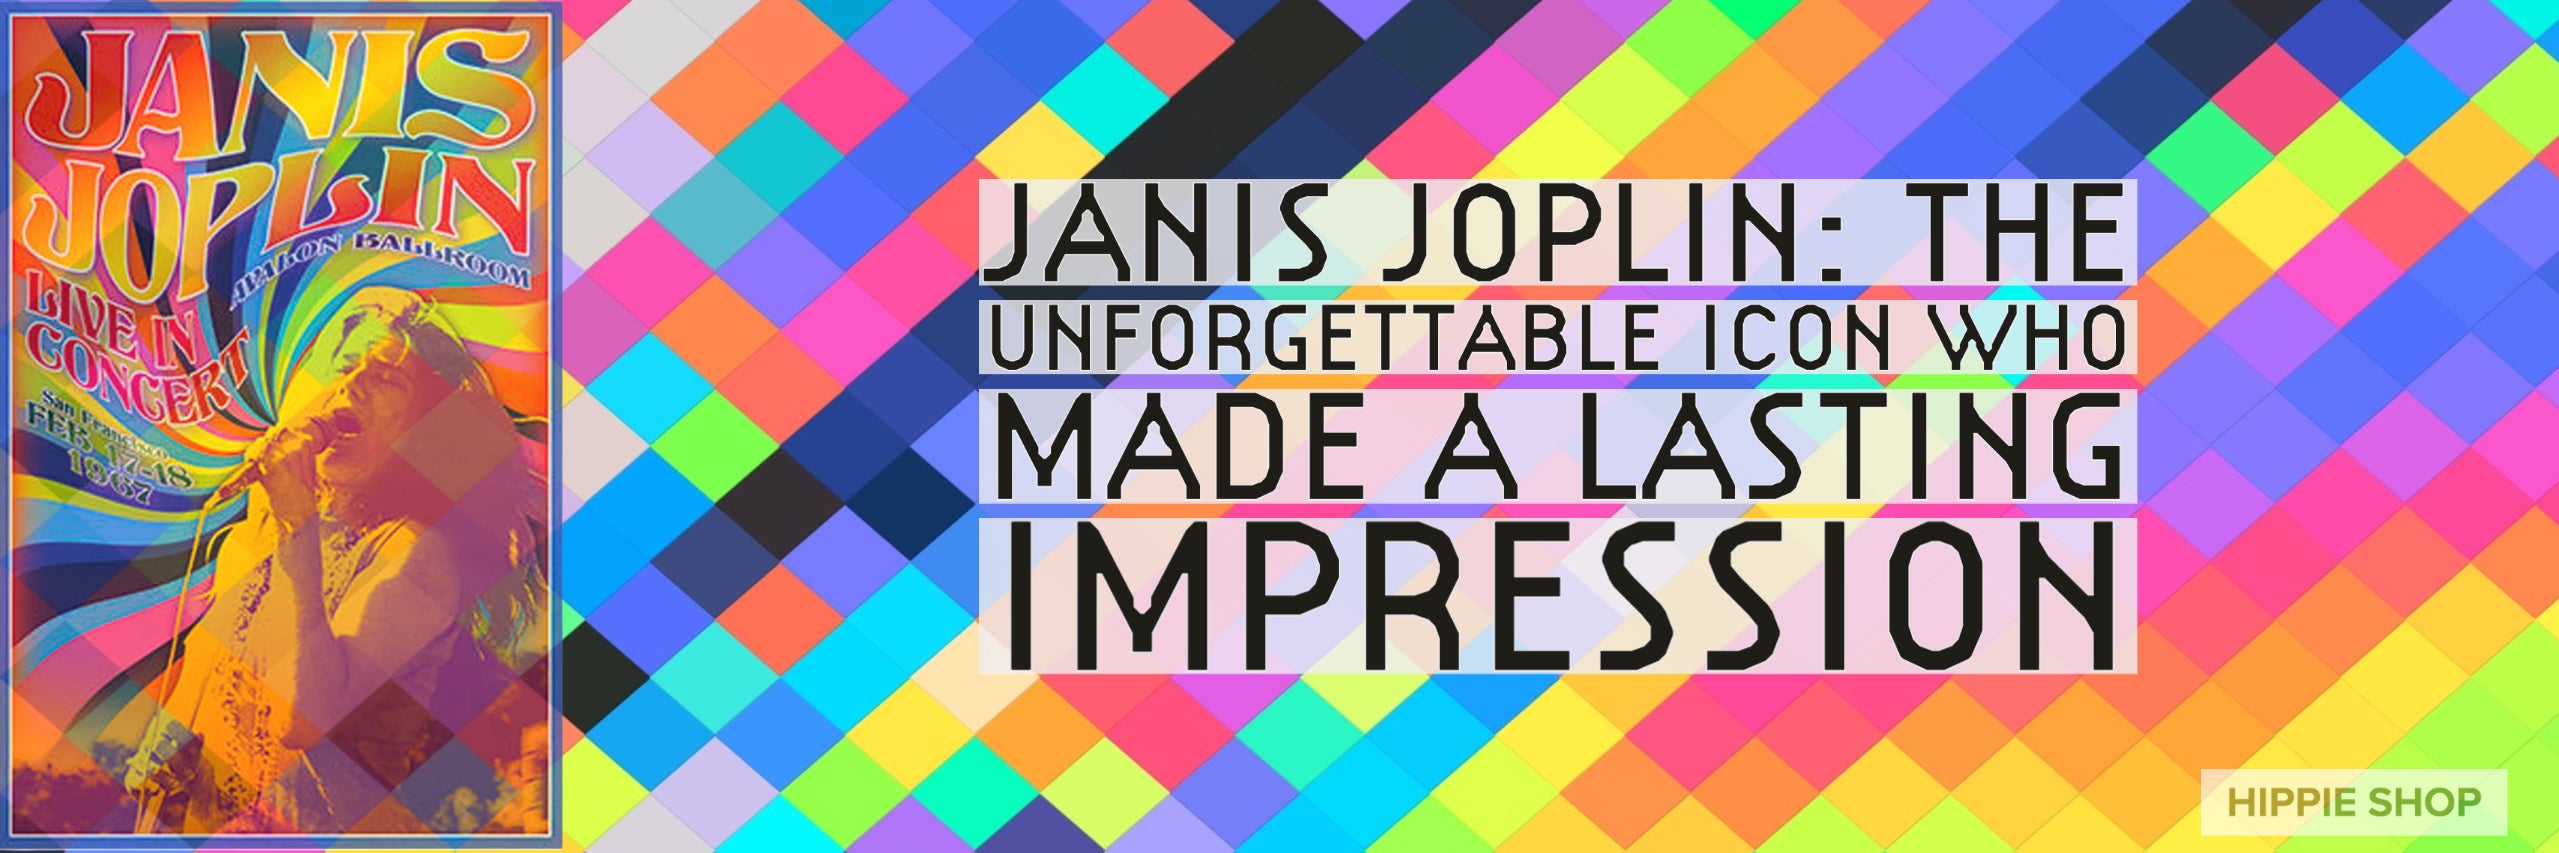 Janis Joplin: The Unforgettable Icon Who Made a Lasting Impression